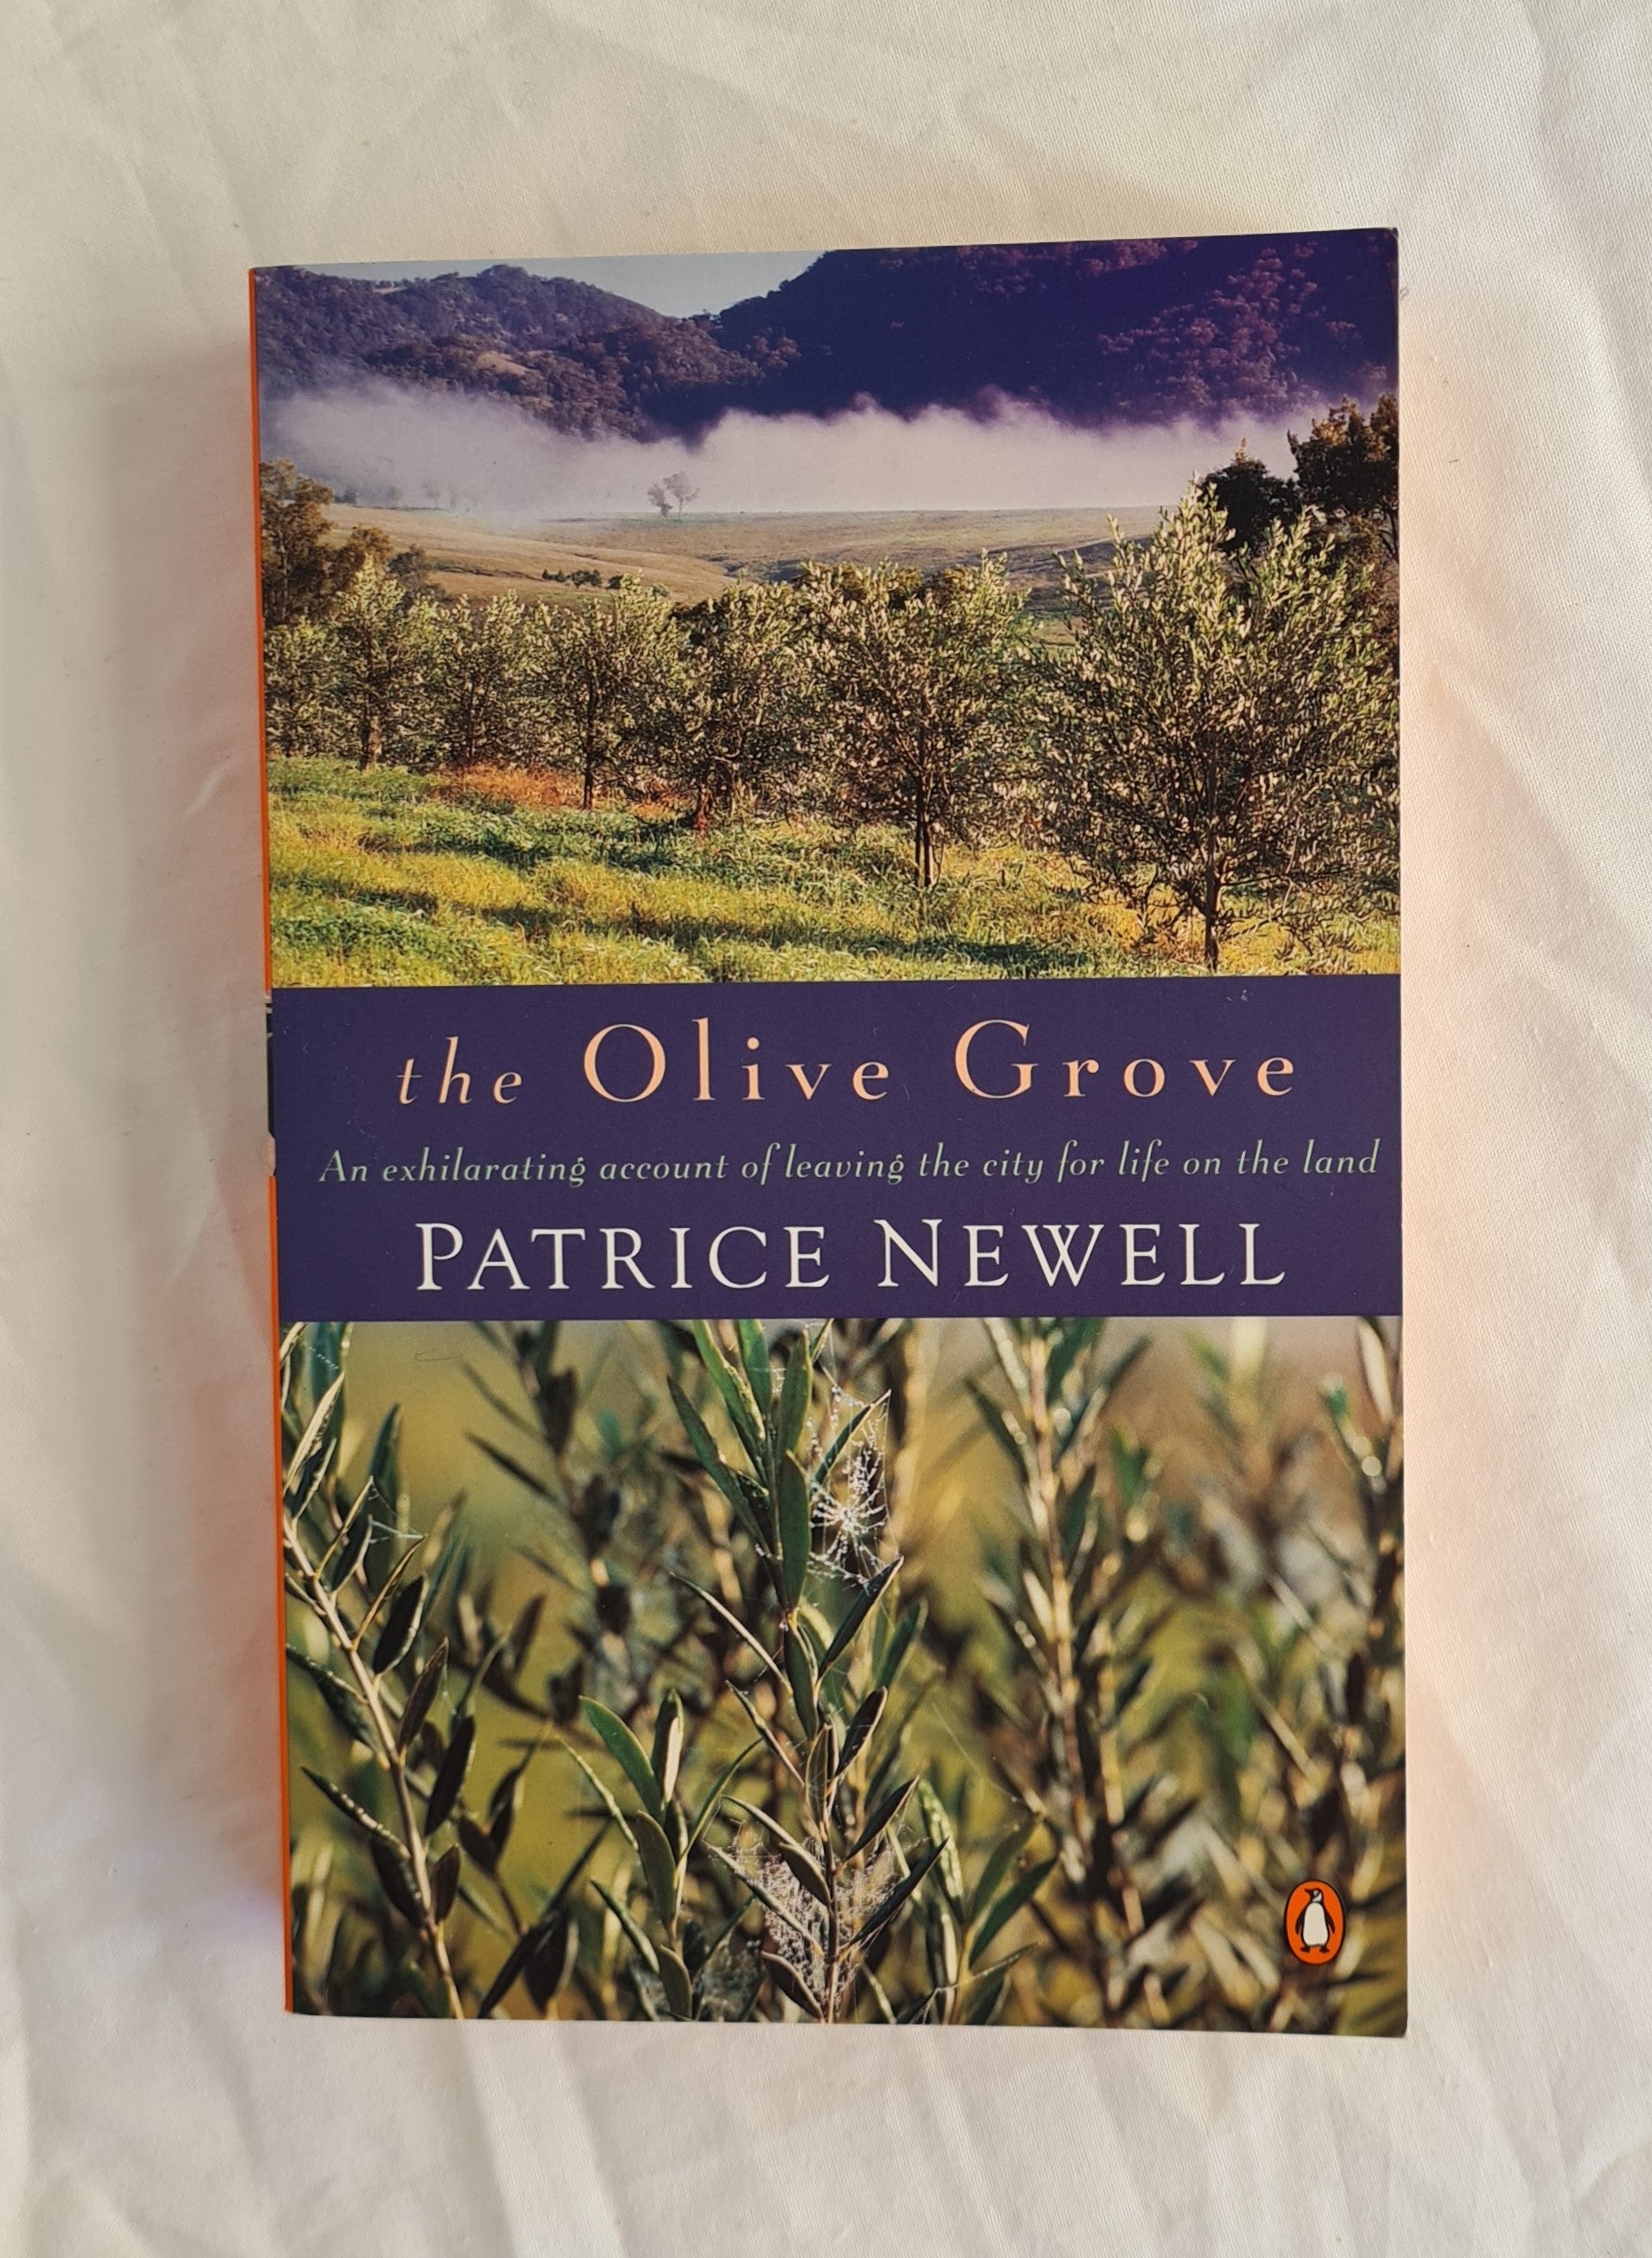 The Olive Grove by Patrice Newell